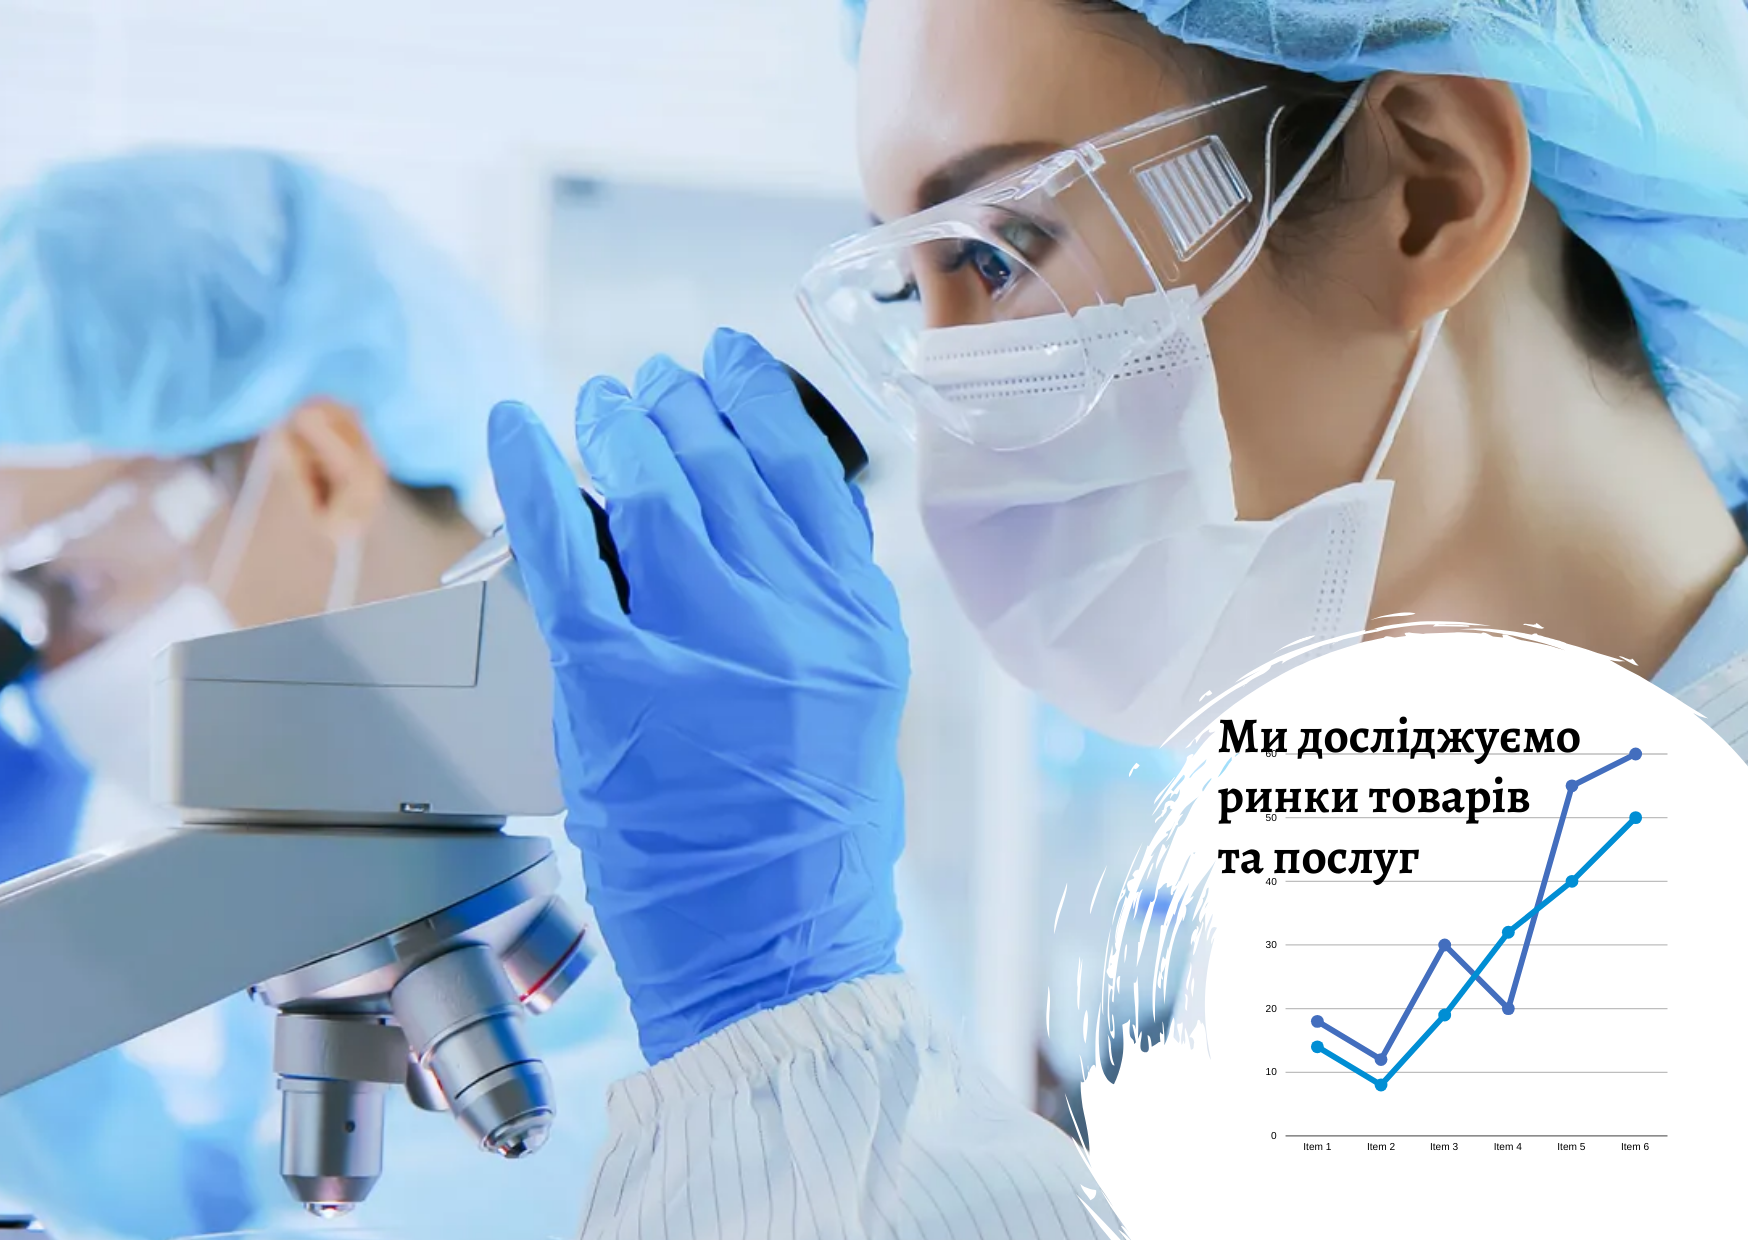 Ukrainian private medical centers market: research results